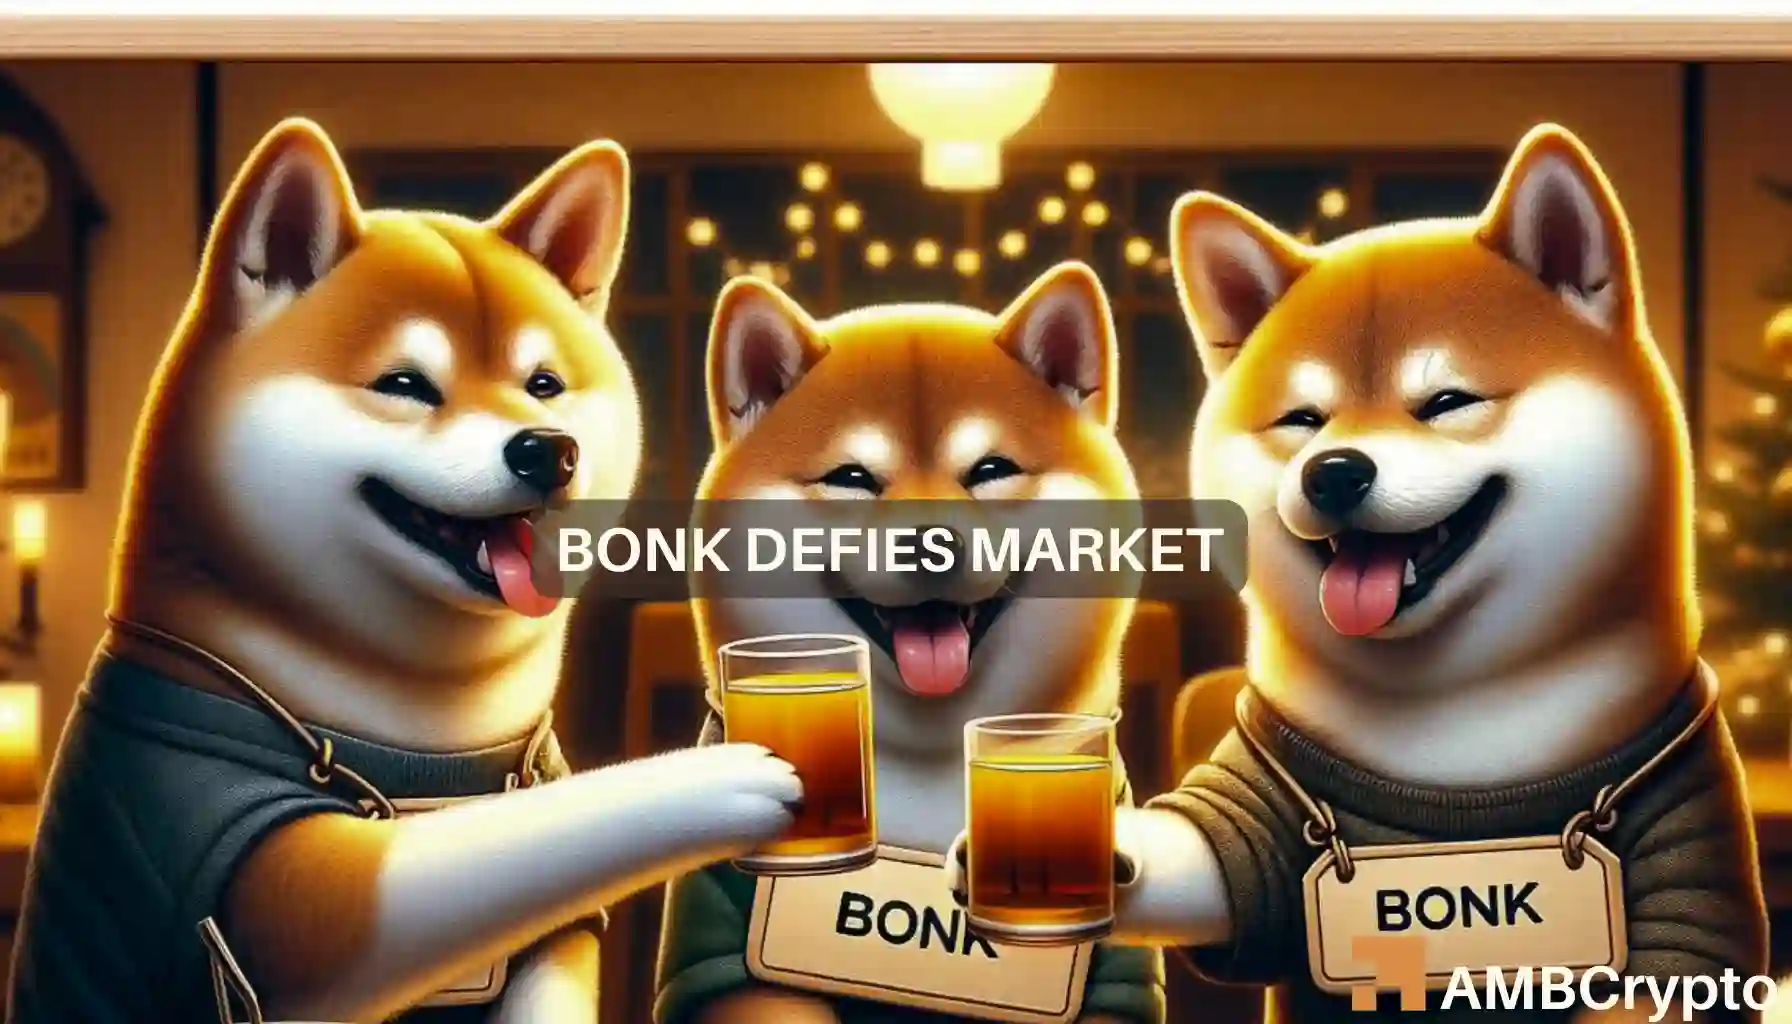 BONK’s price rally – Explaining its 83% pump over the week